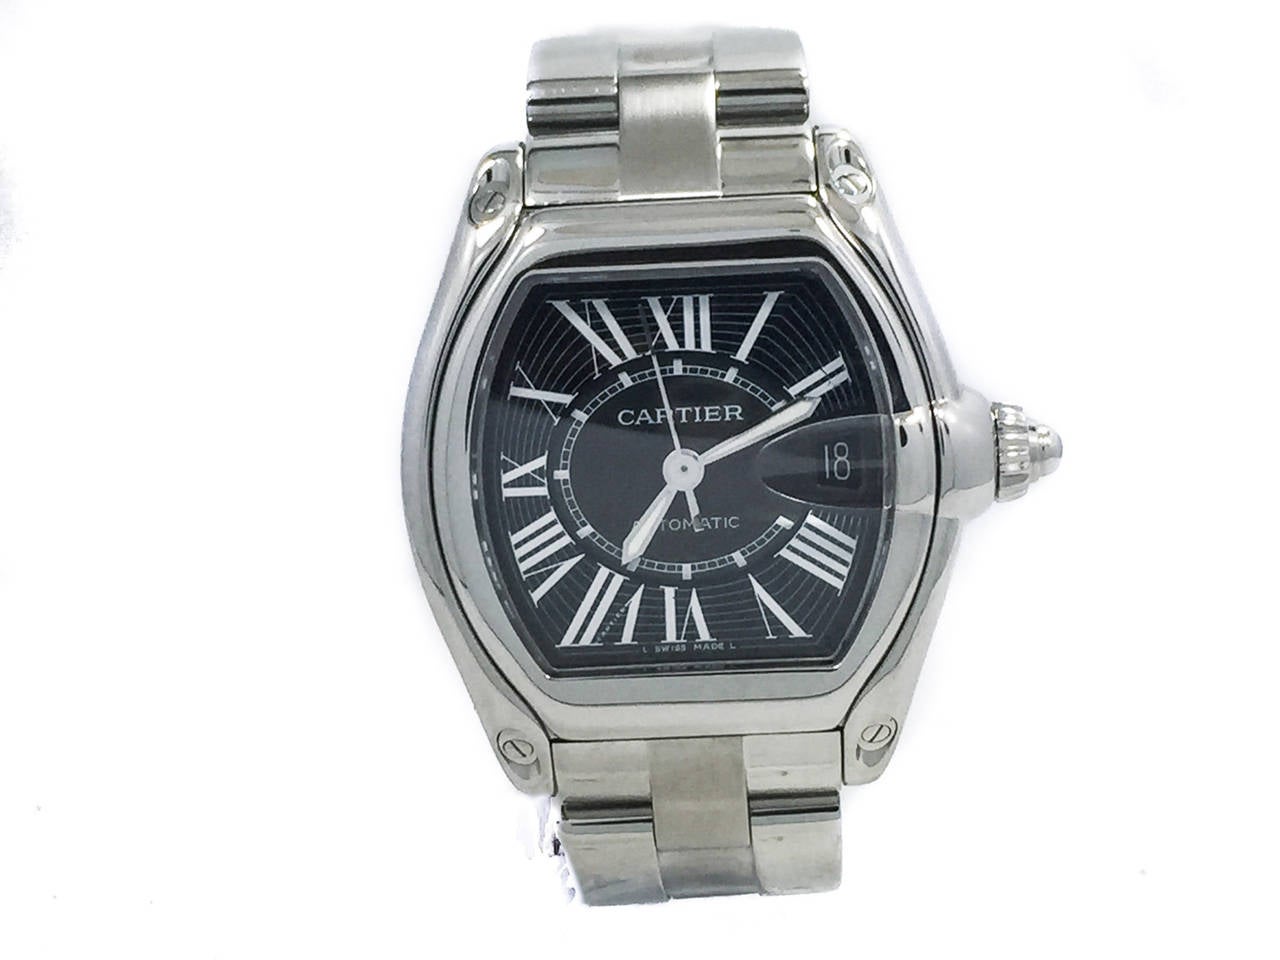 Mens Cartier Roadster in Stainless Steel W/ Black Dial on Bracelet, Ref W62041V3, Retails $7,300. The Watch is in Excellent Condition & Working Great, Movement is Powered by Automatic Mechanical Winding. Included with the Watch are its Box, Full